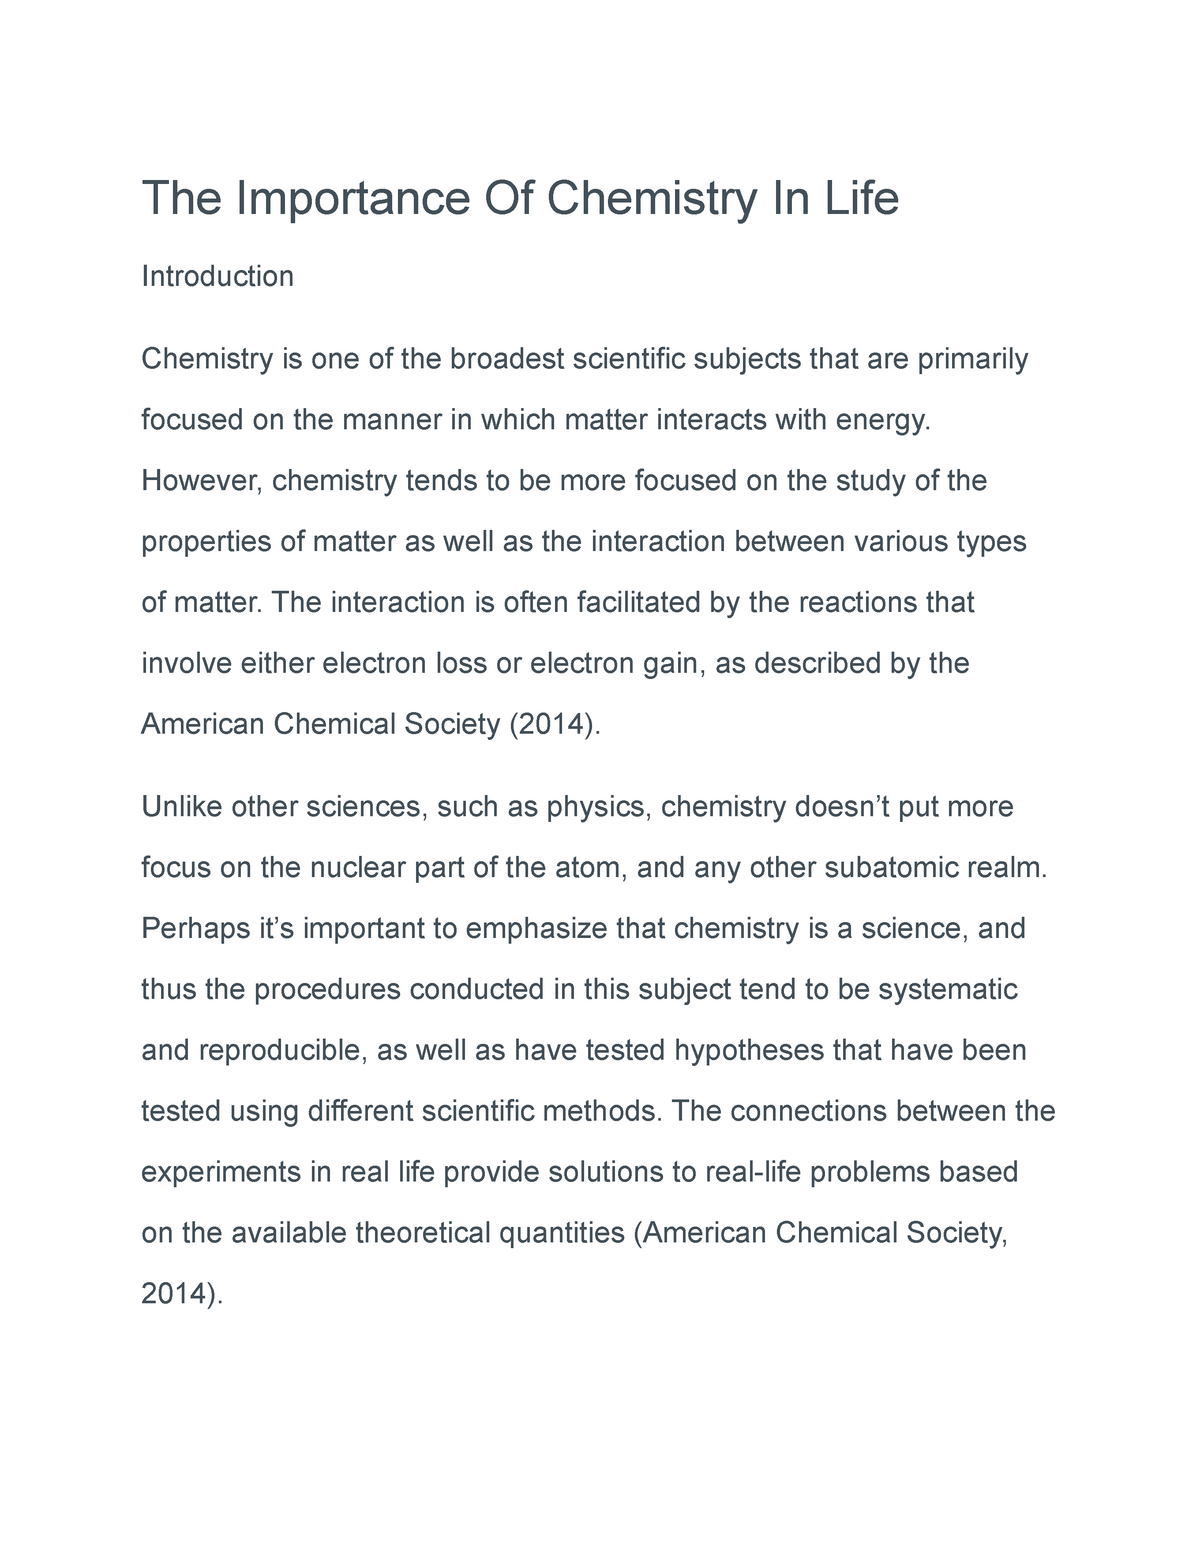 history of chemistry essay 300 words